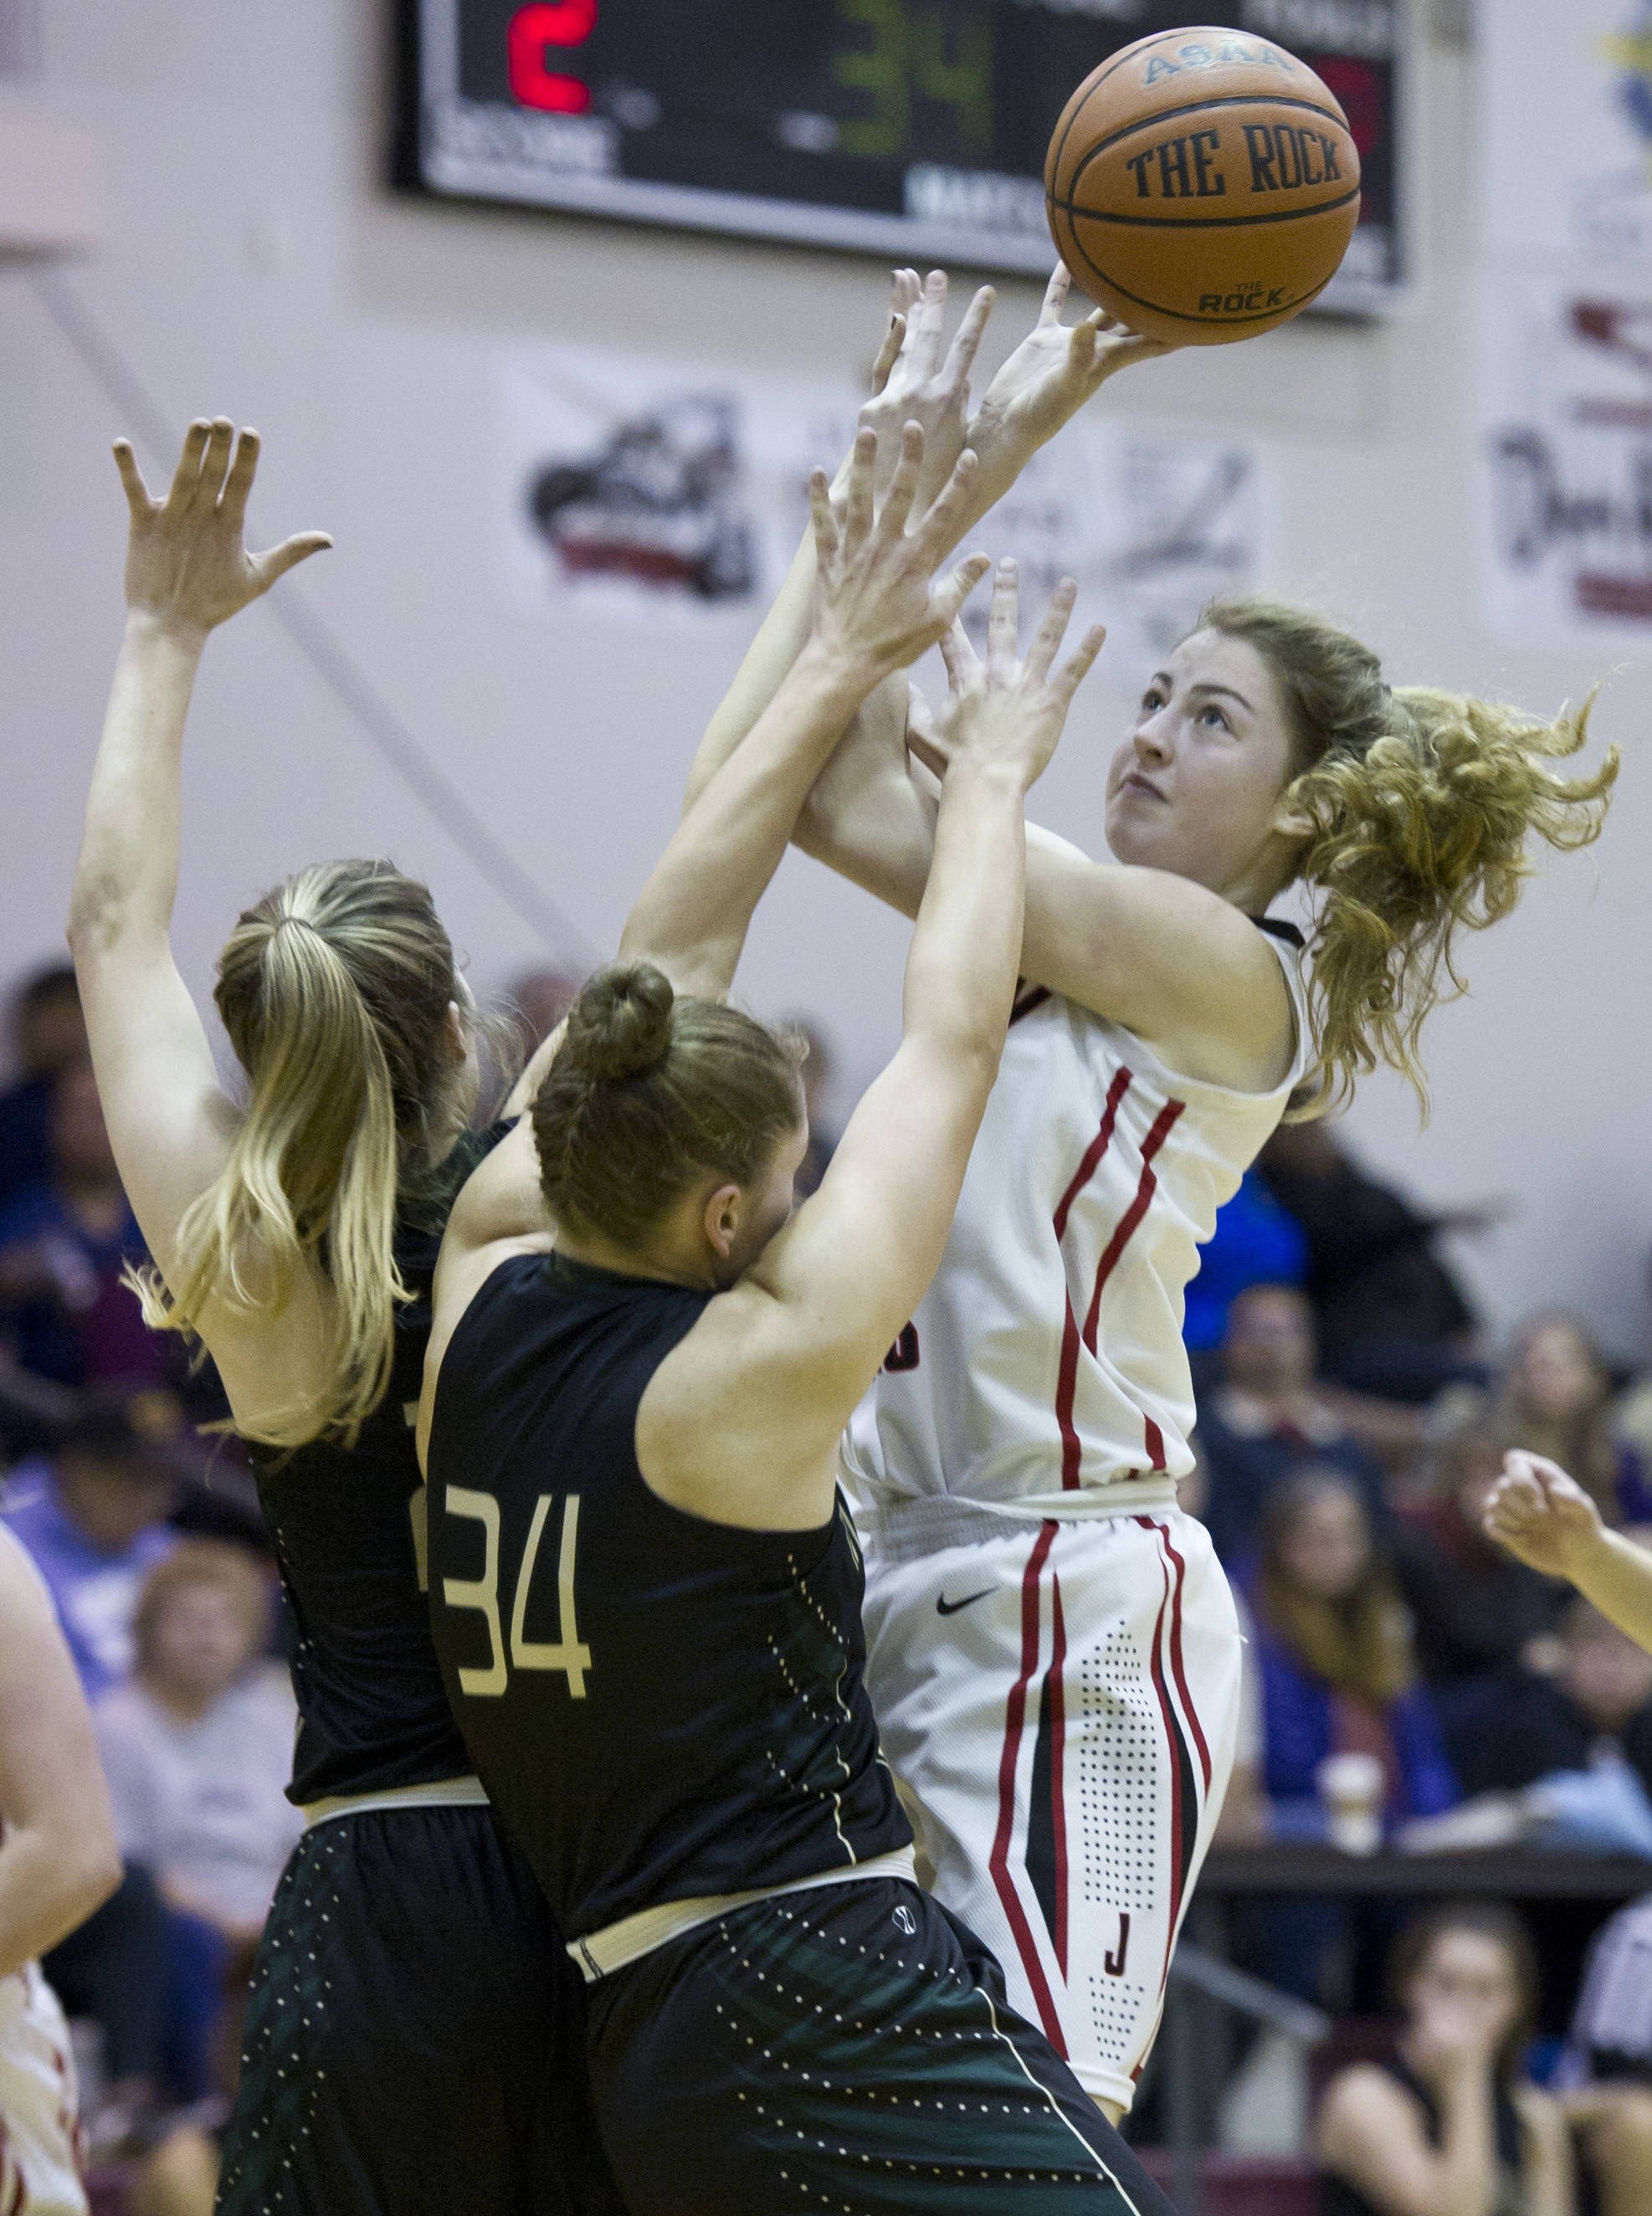 Juneau-Douglas’ Kendyl Carson puts up a shot against Marysville’s Maddy Grandbois, center, and Carley Wika during the Capital City Classic at JDHS on Friday, Dec. 30, 2016. (Michael Penn | Juneau Empire File)